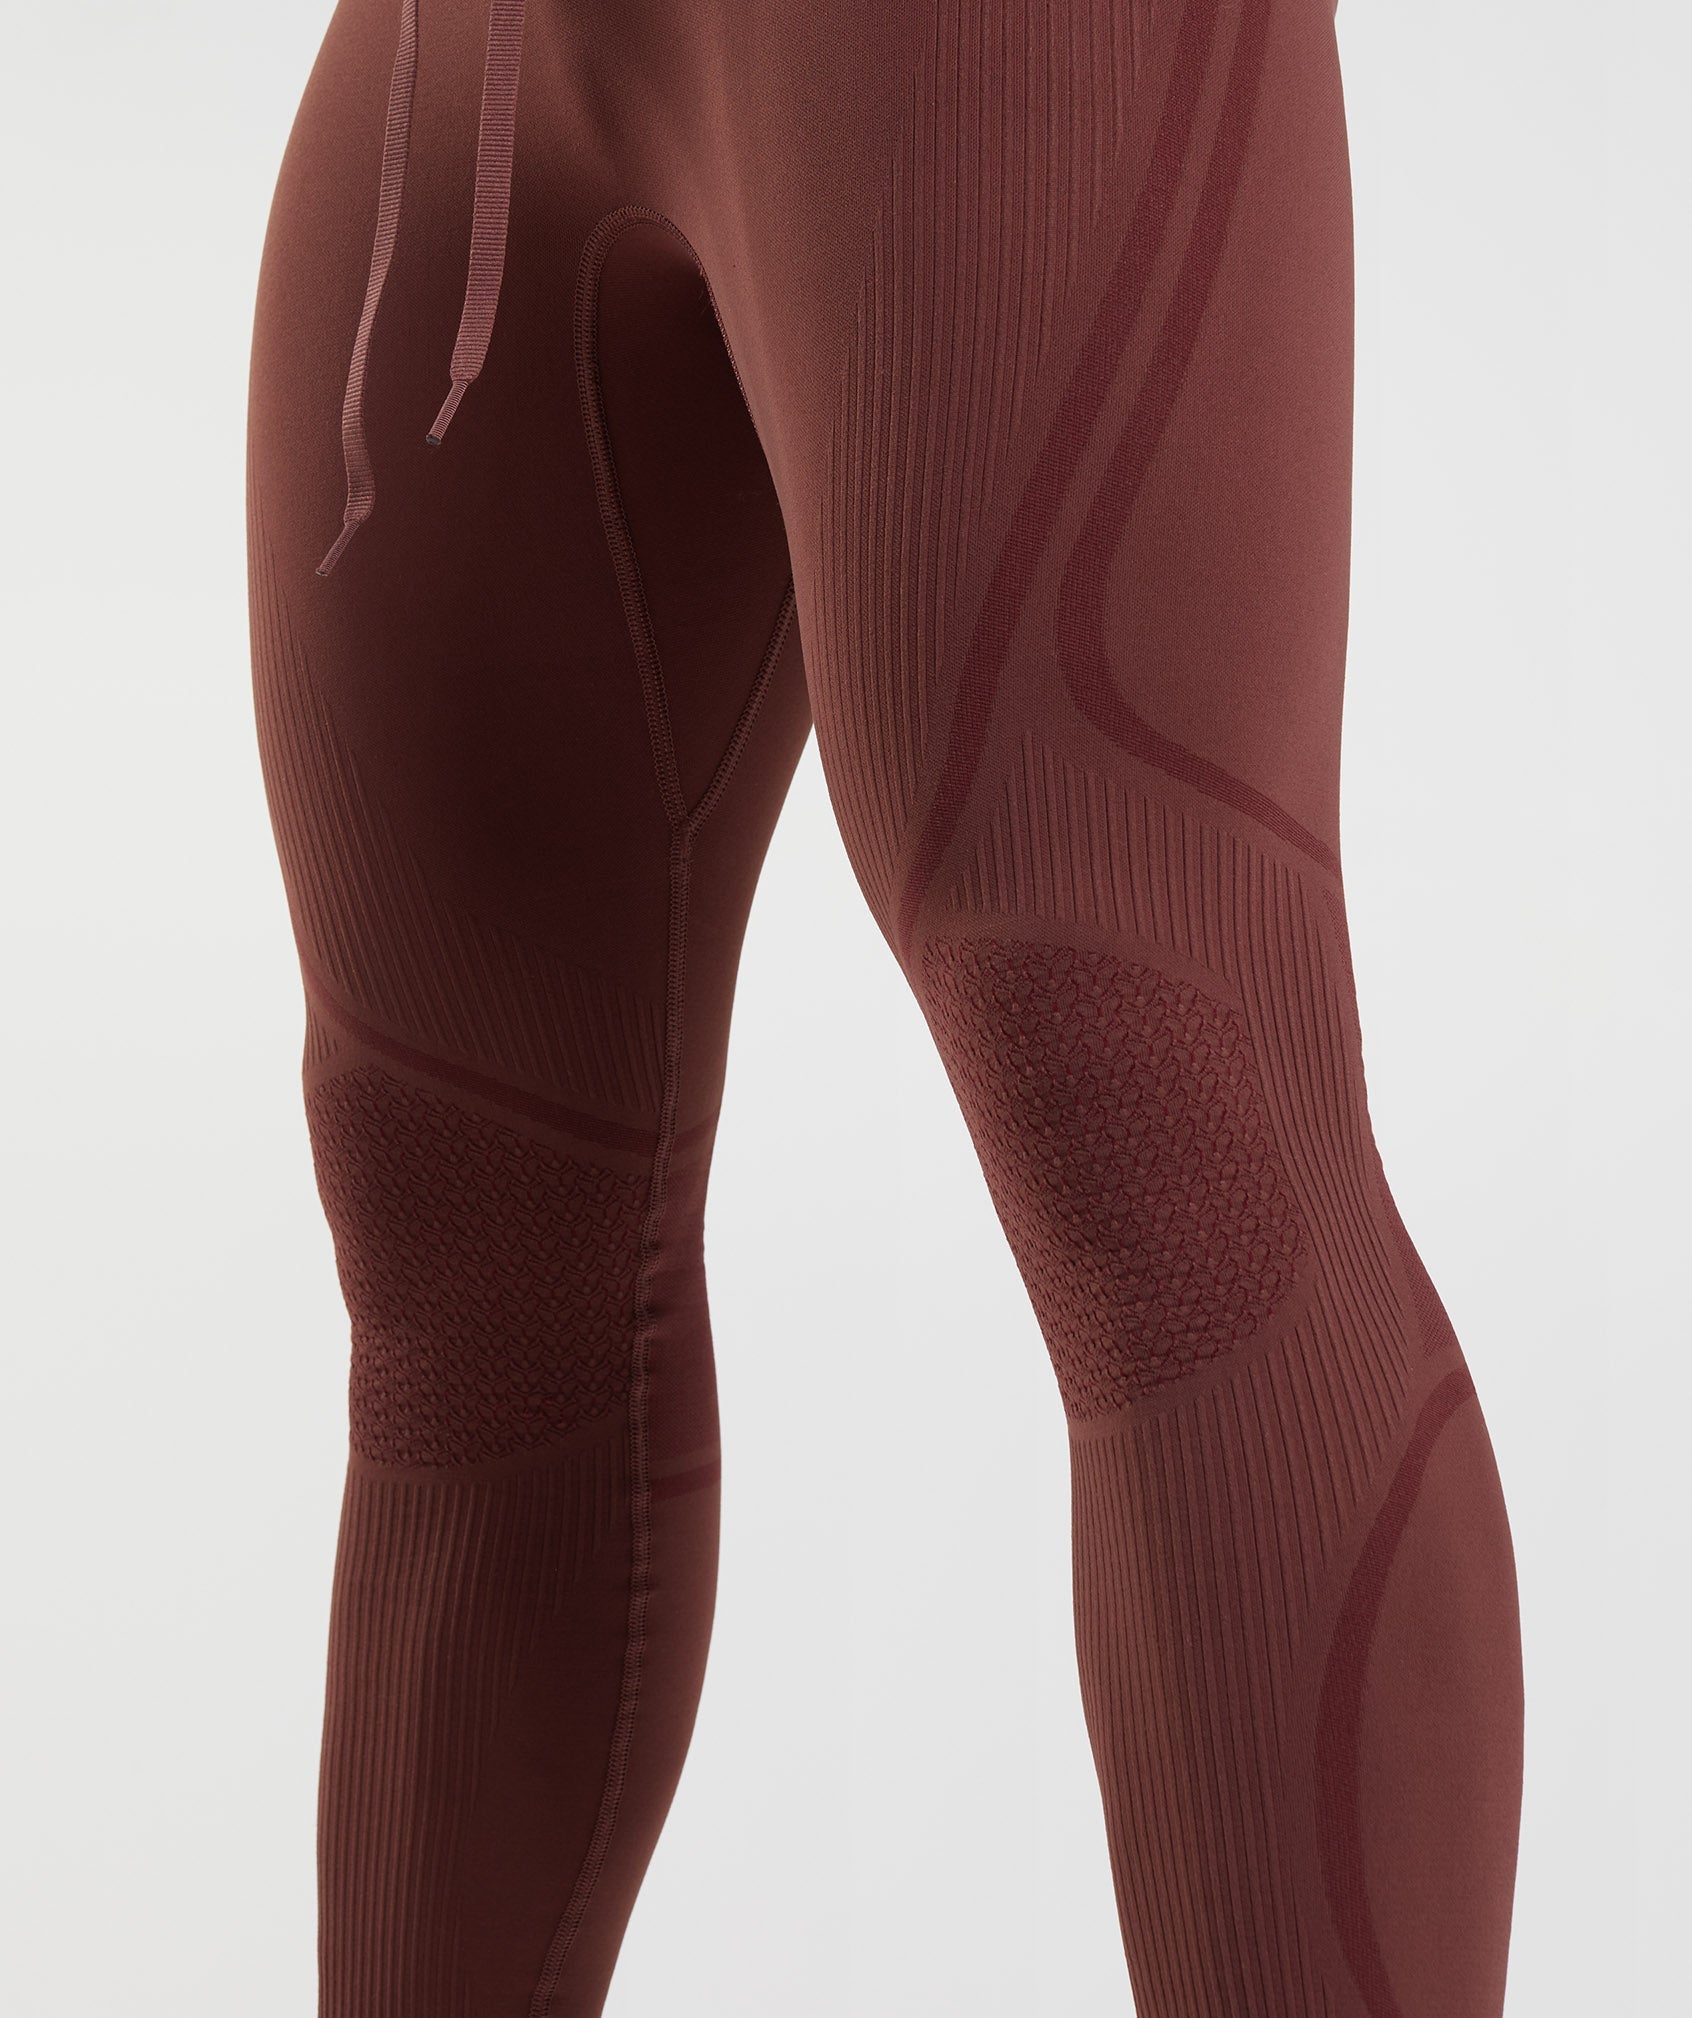 315 Seamless Tights in Cherry Brown/Athletic Maroon